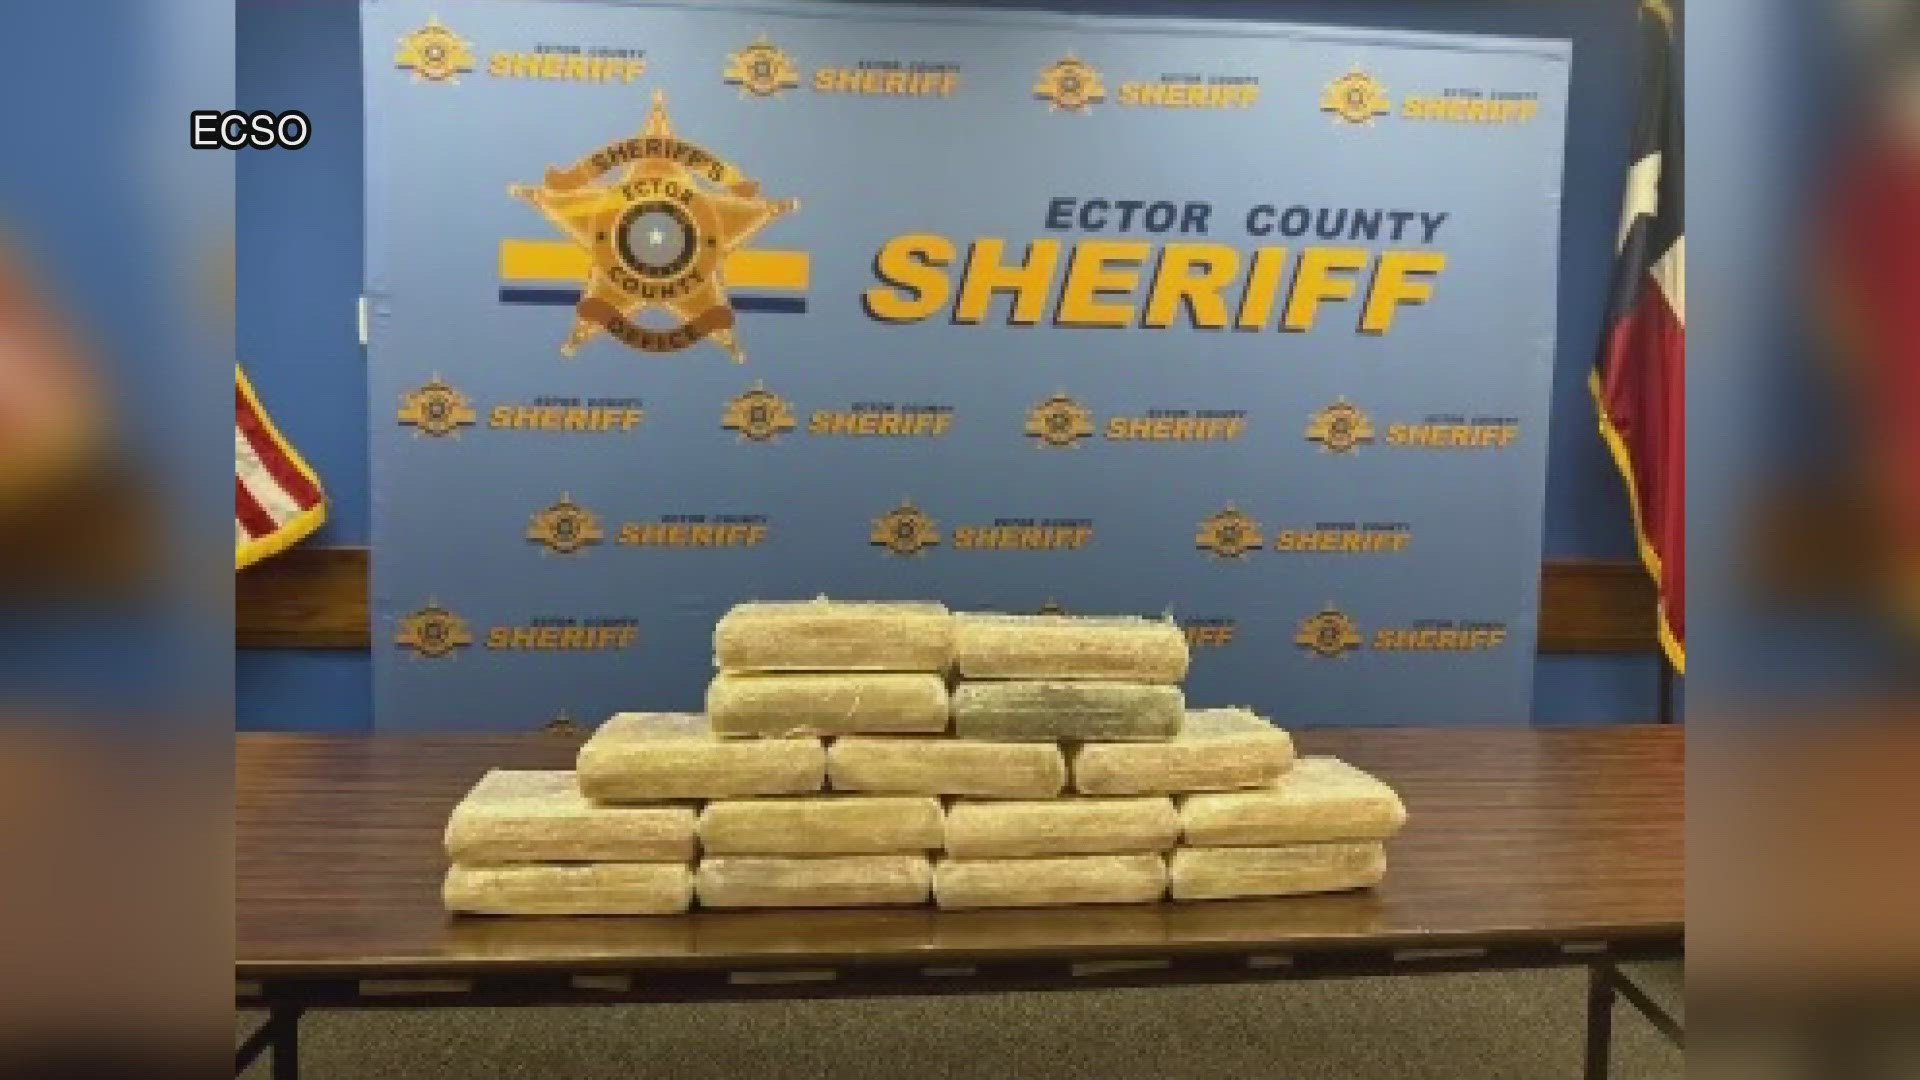 On Tuesday, Feb. 13, Ector County deputies conducted a traffic stop at West I-20 and S. Moss Ave and found over 10 kilograms of cocaine in the driver's car.